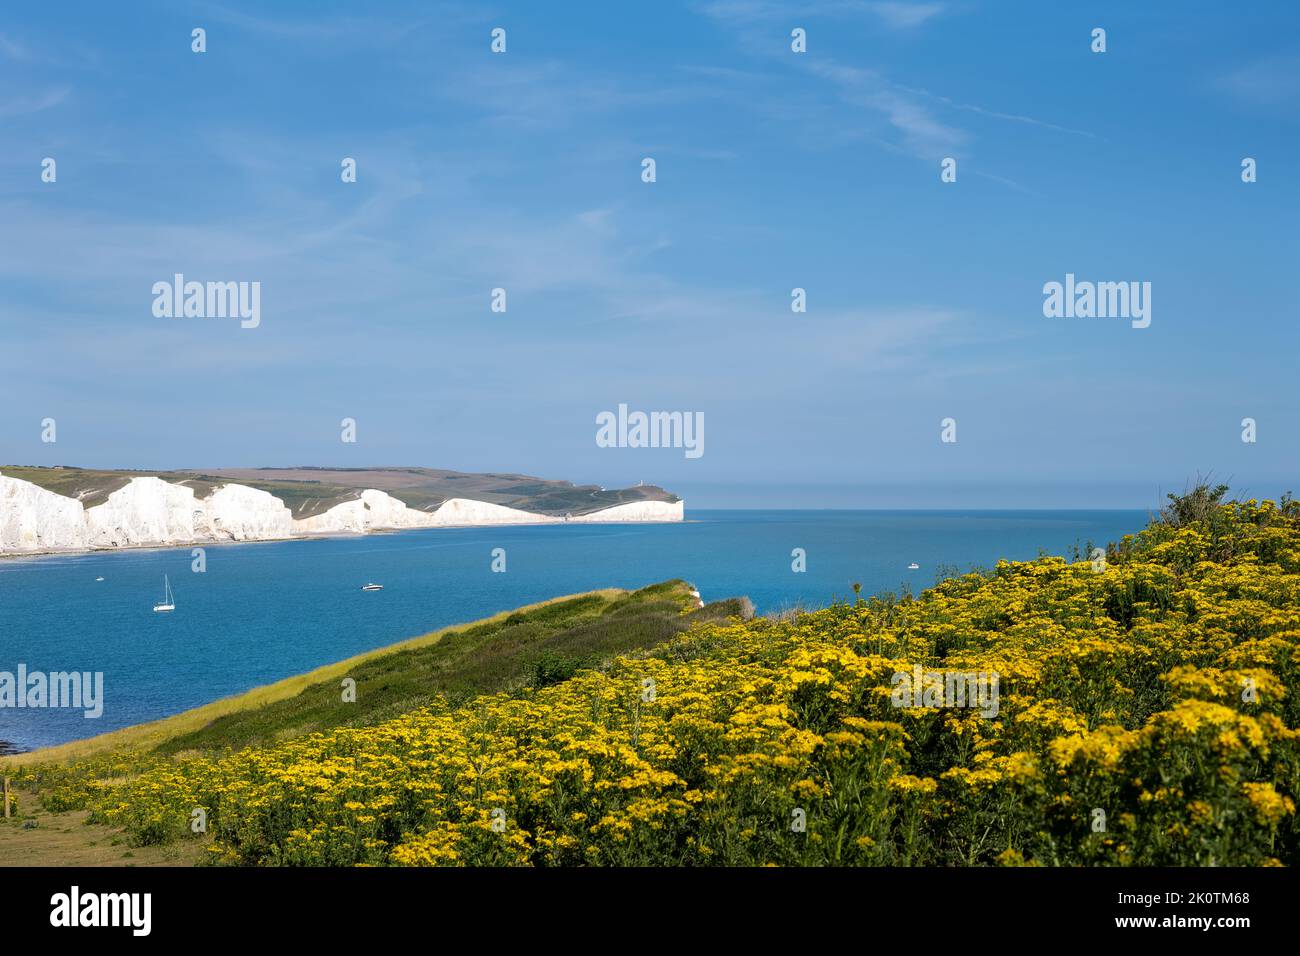 View of the Seven Sisters Country Park over an expanse of yellow flowers on a sunny summer afternoon, East Sussex, England Stock Photo